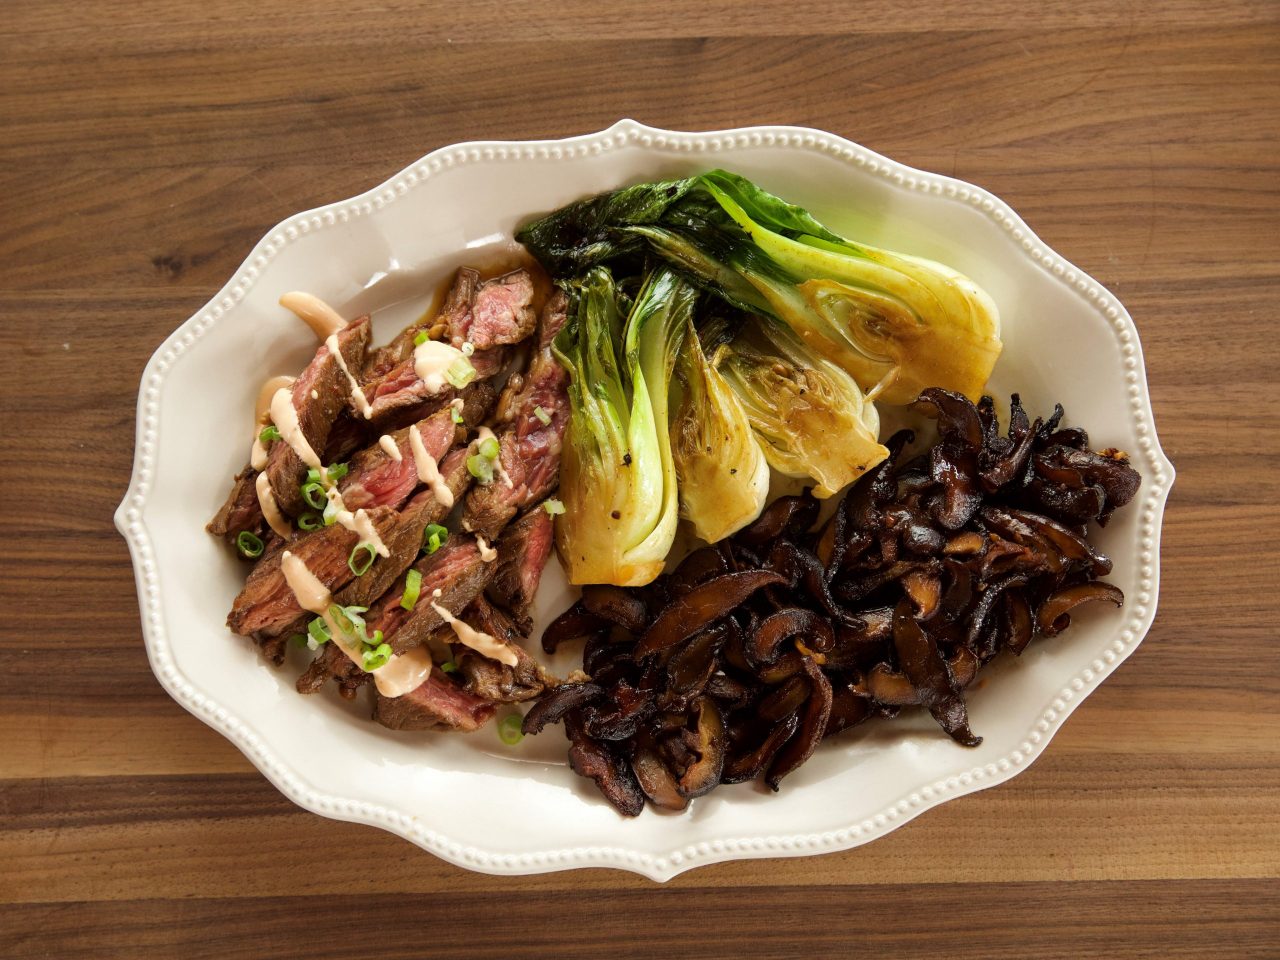 Ree Drummond's Skirt Steak with Bok Choy, as seen on The Pioneer Woman.